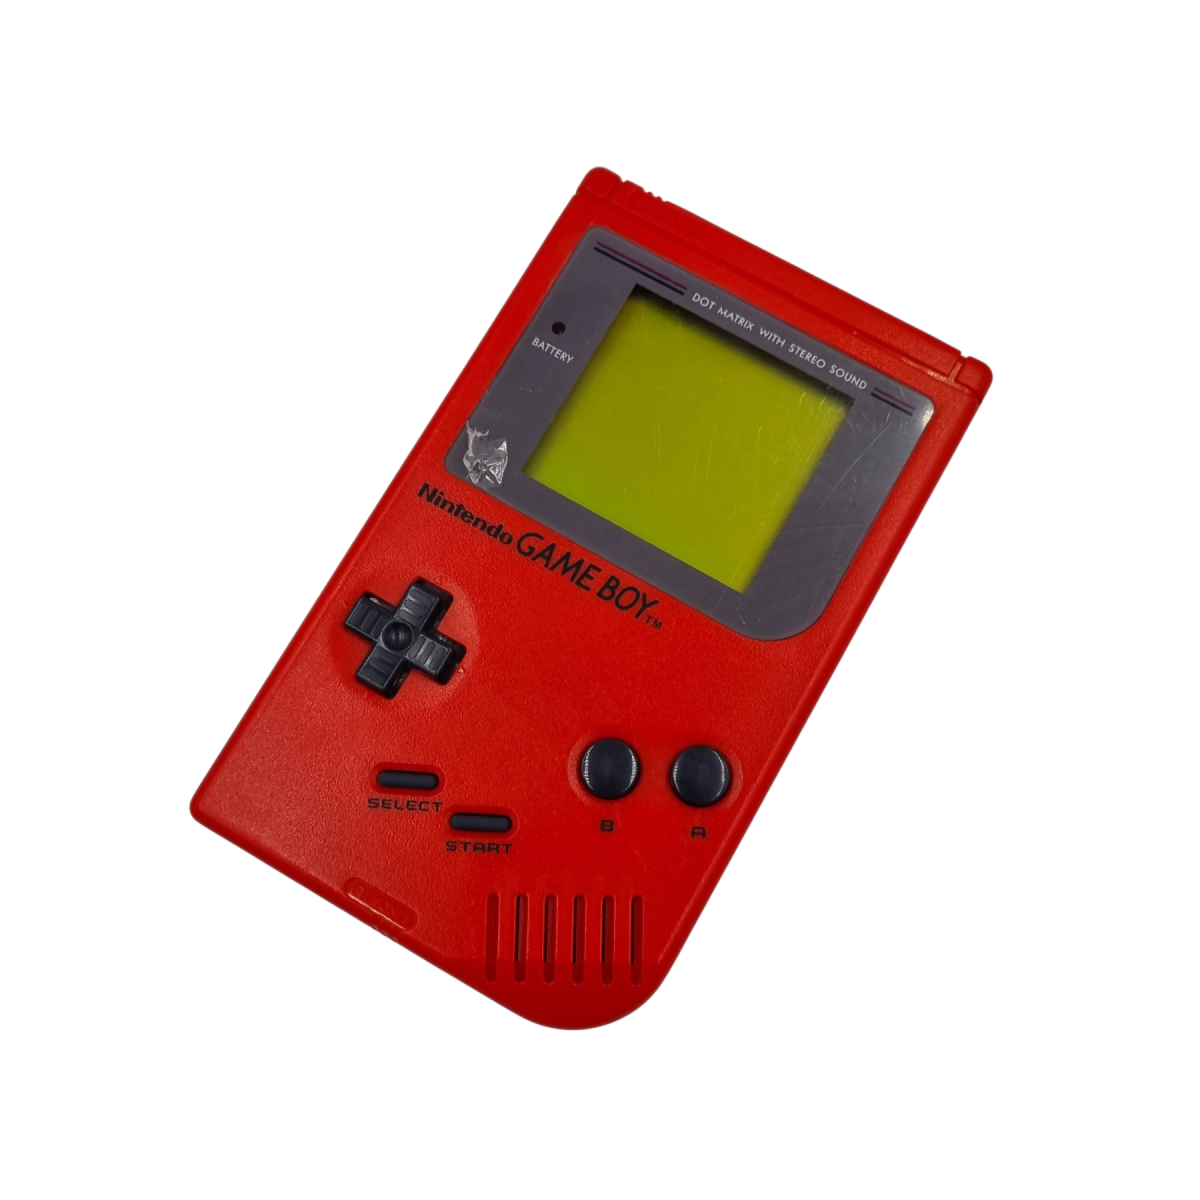 GAME BOY Play It Loud Radiant Red